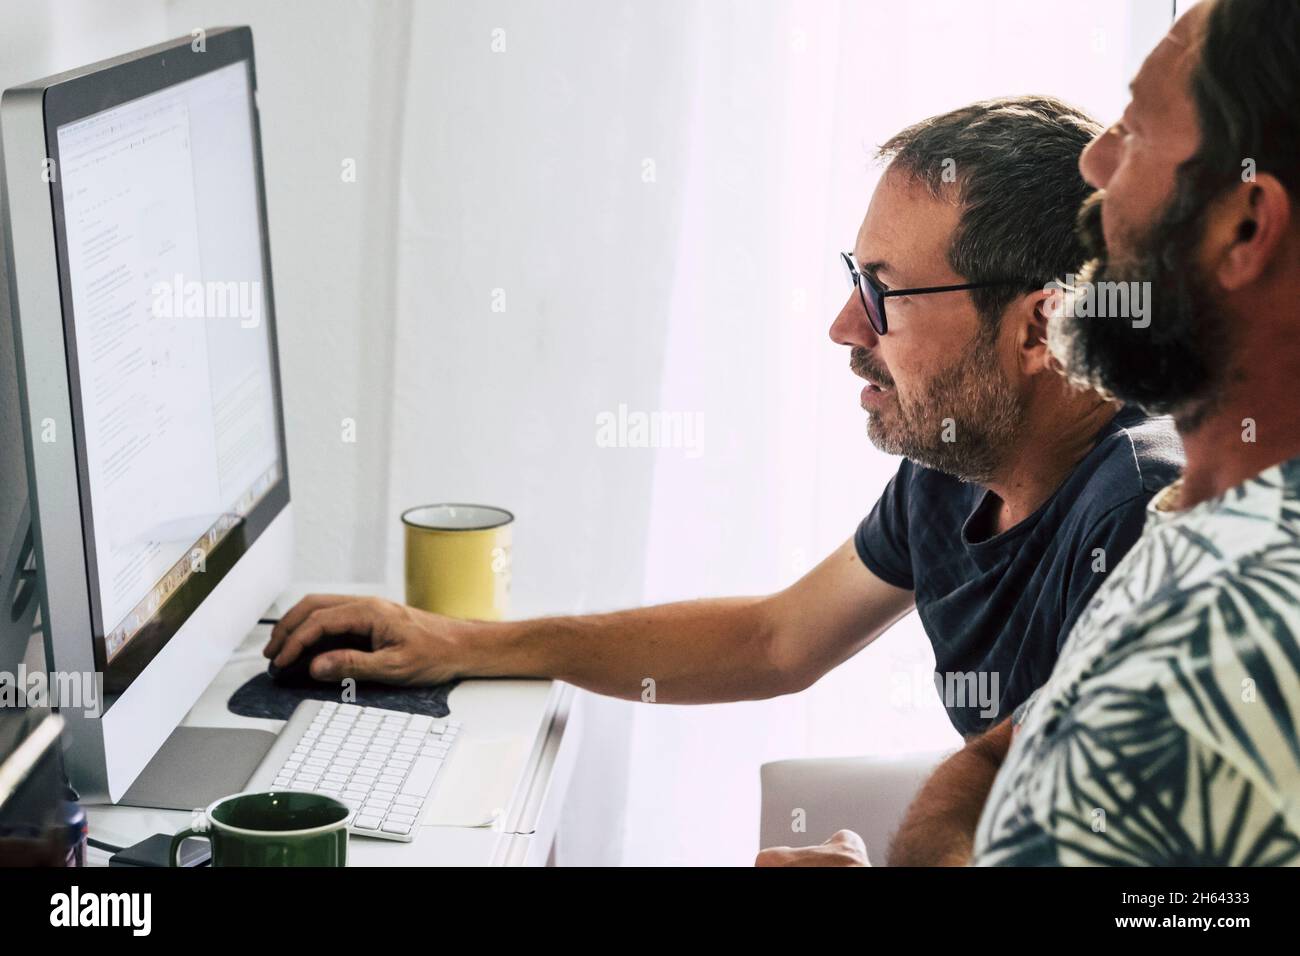 two employees working on desktop computers together. mature men working as a team while using desktop computer. two men busy working on computer,reading email on monitor screen Stock Photo